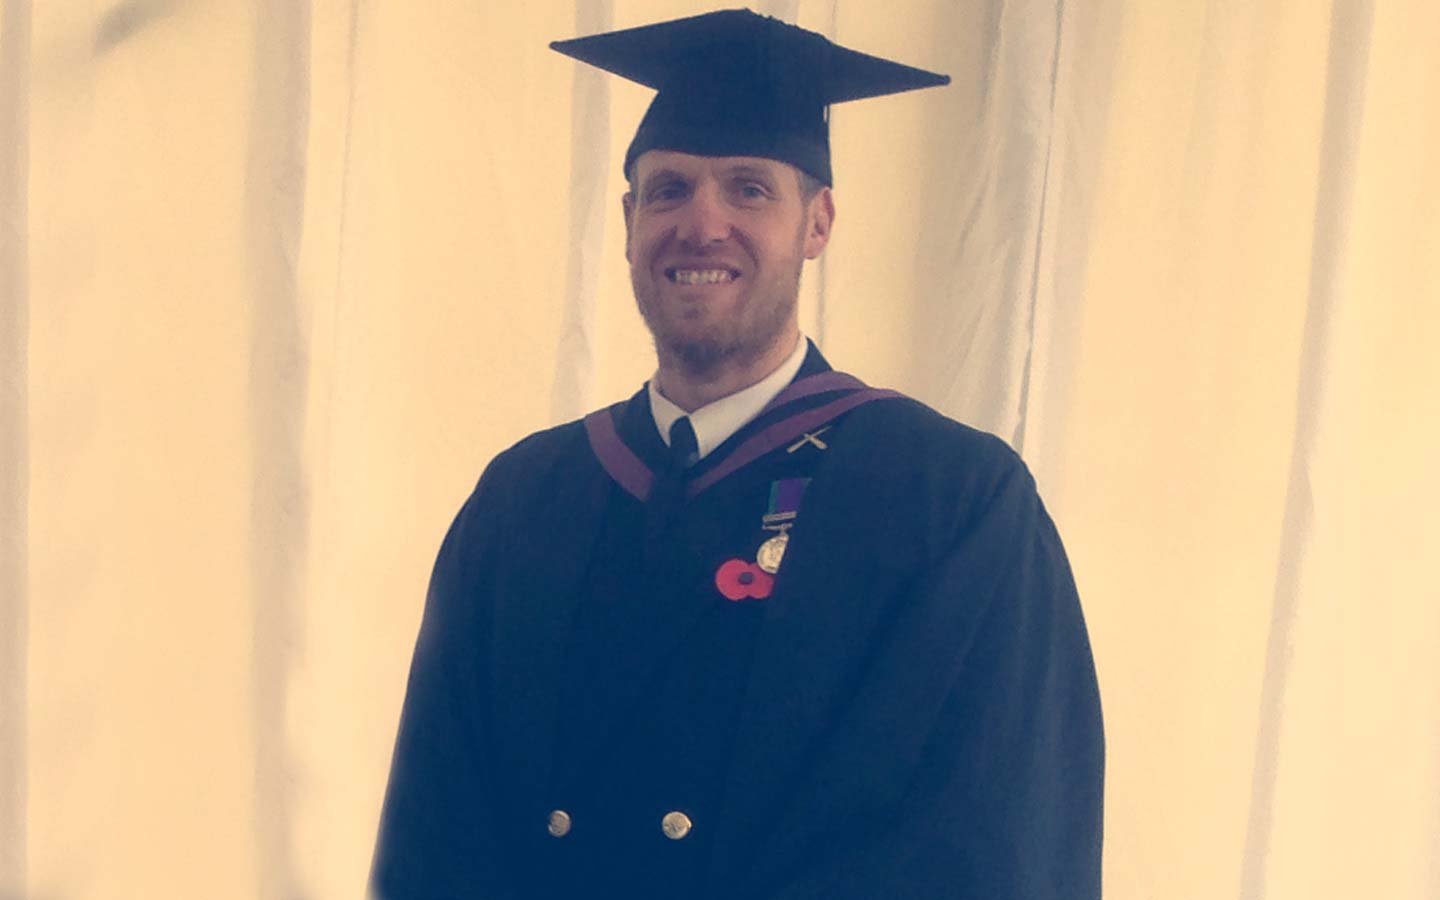 Armed Forces student Paul Todd